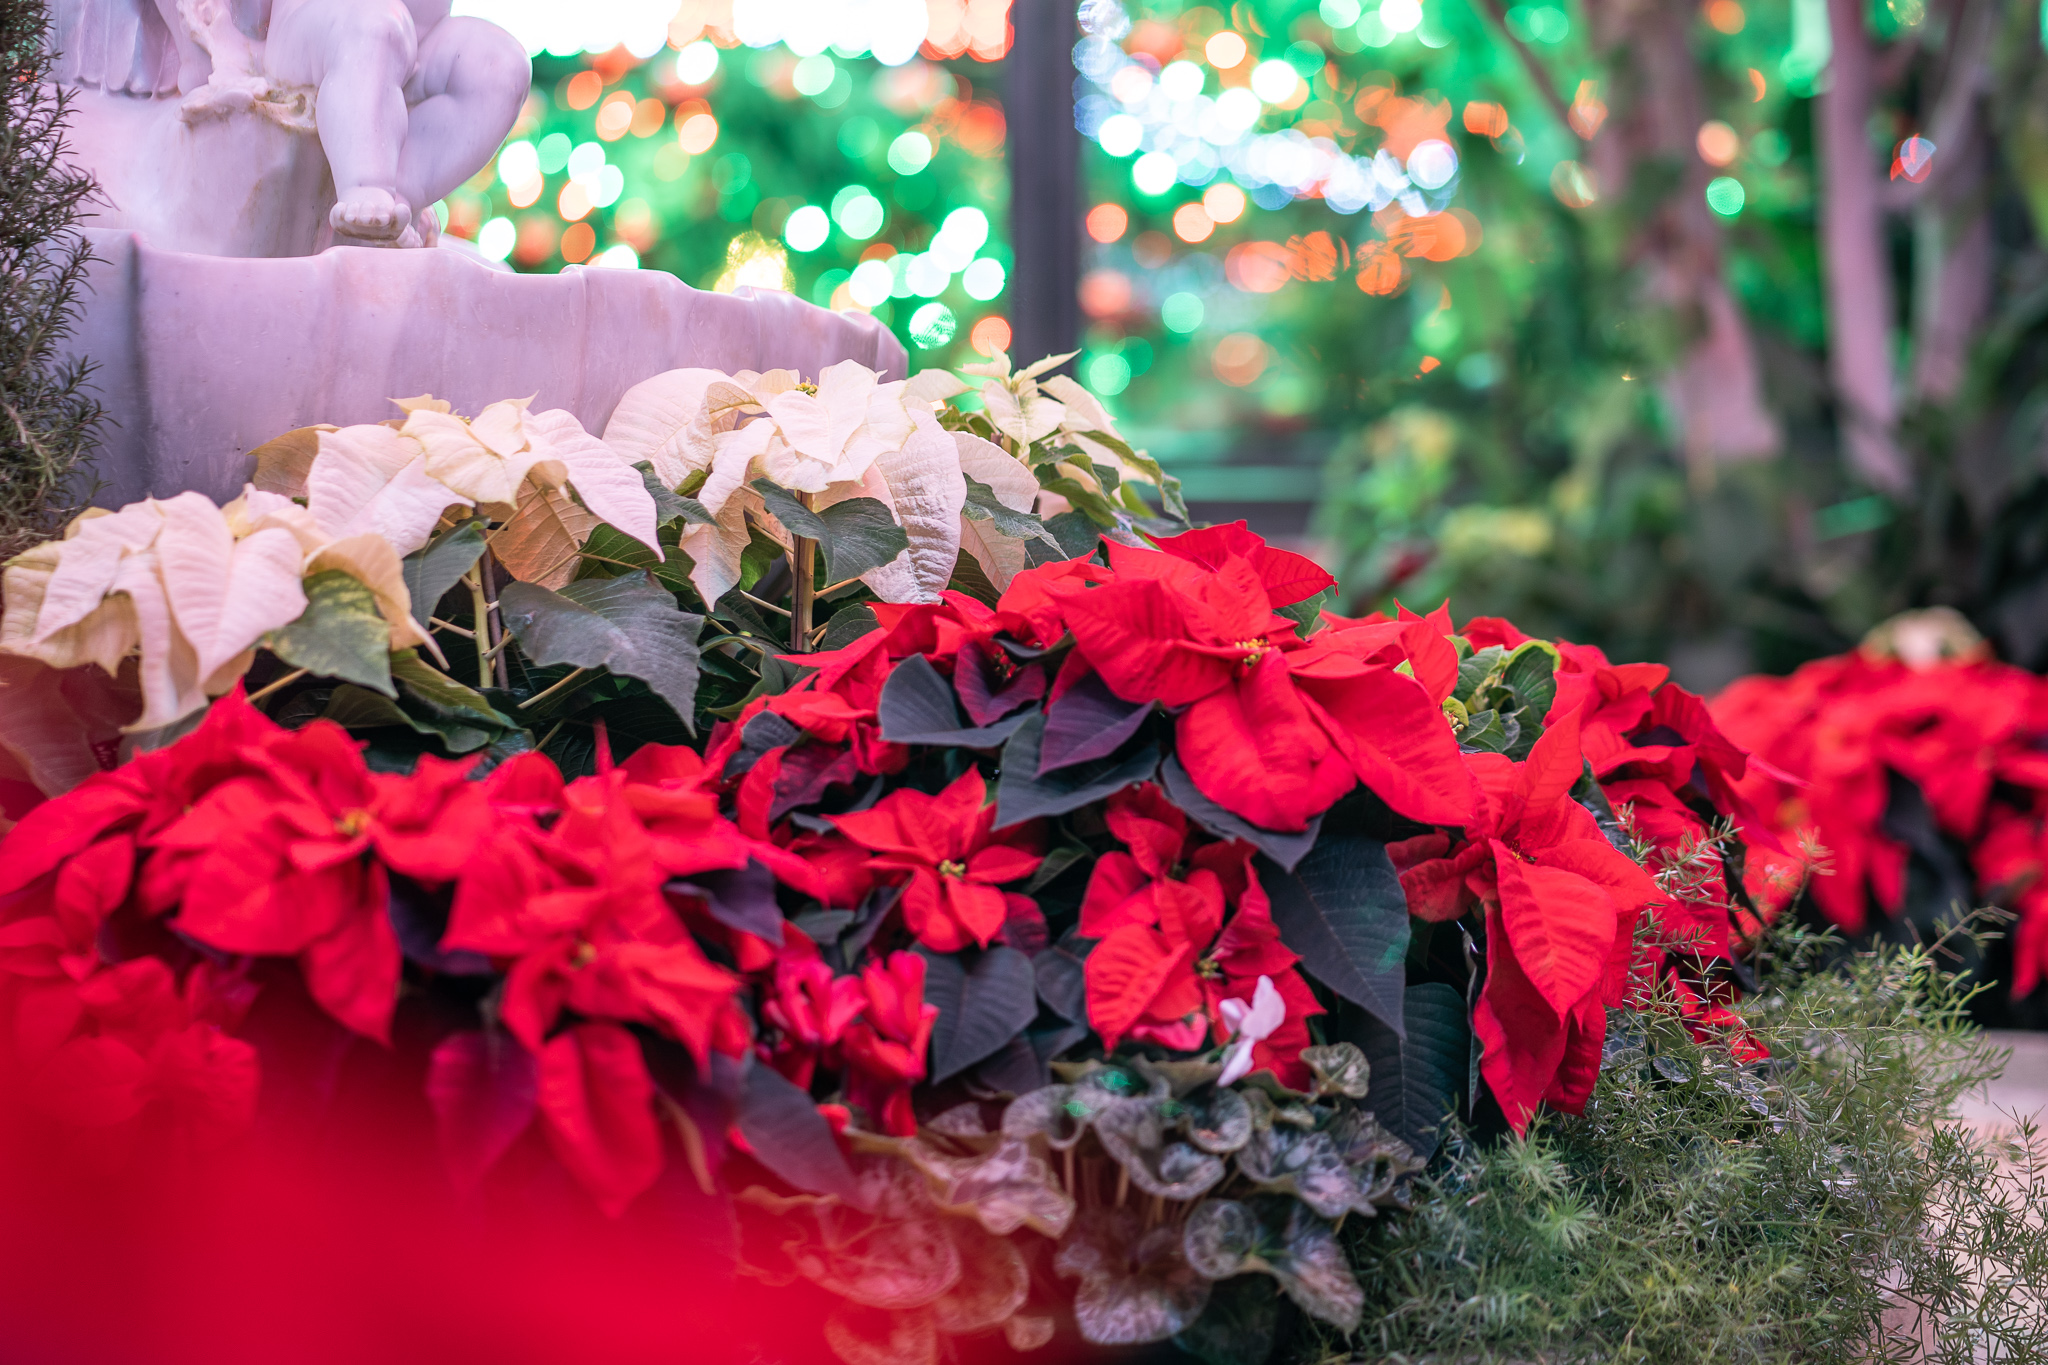 A different view of the multiple colour Poinsettia decorated inside the Floral Showhouse for the Poinsettia Show